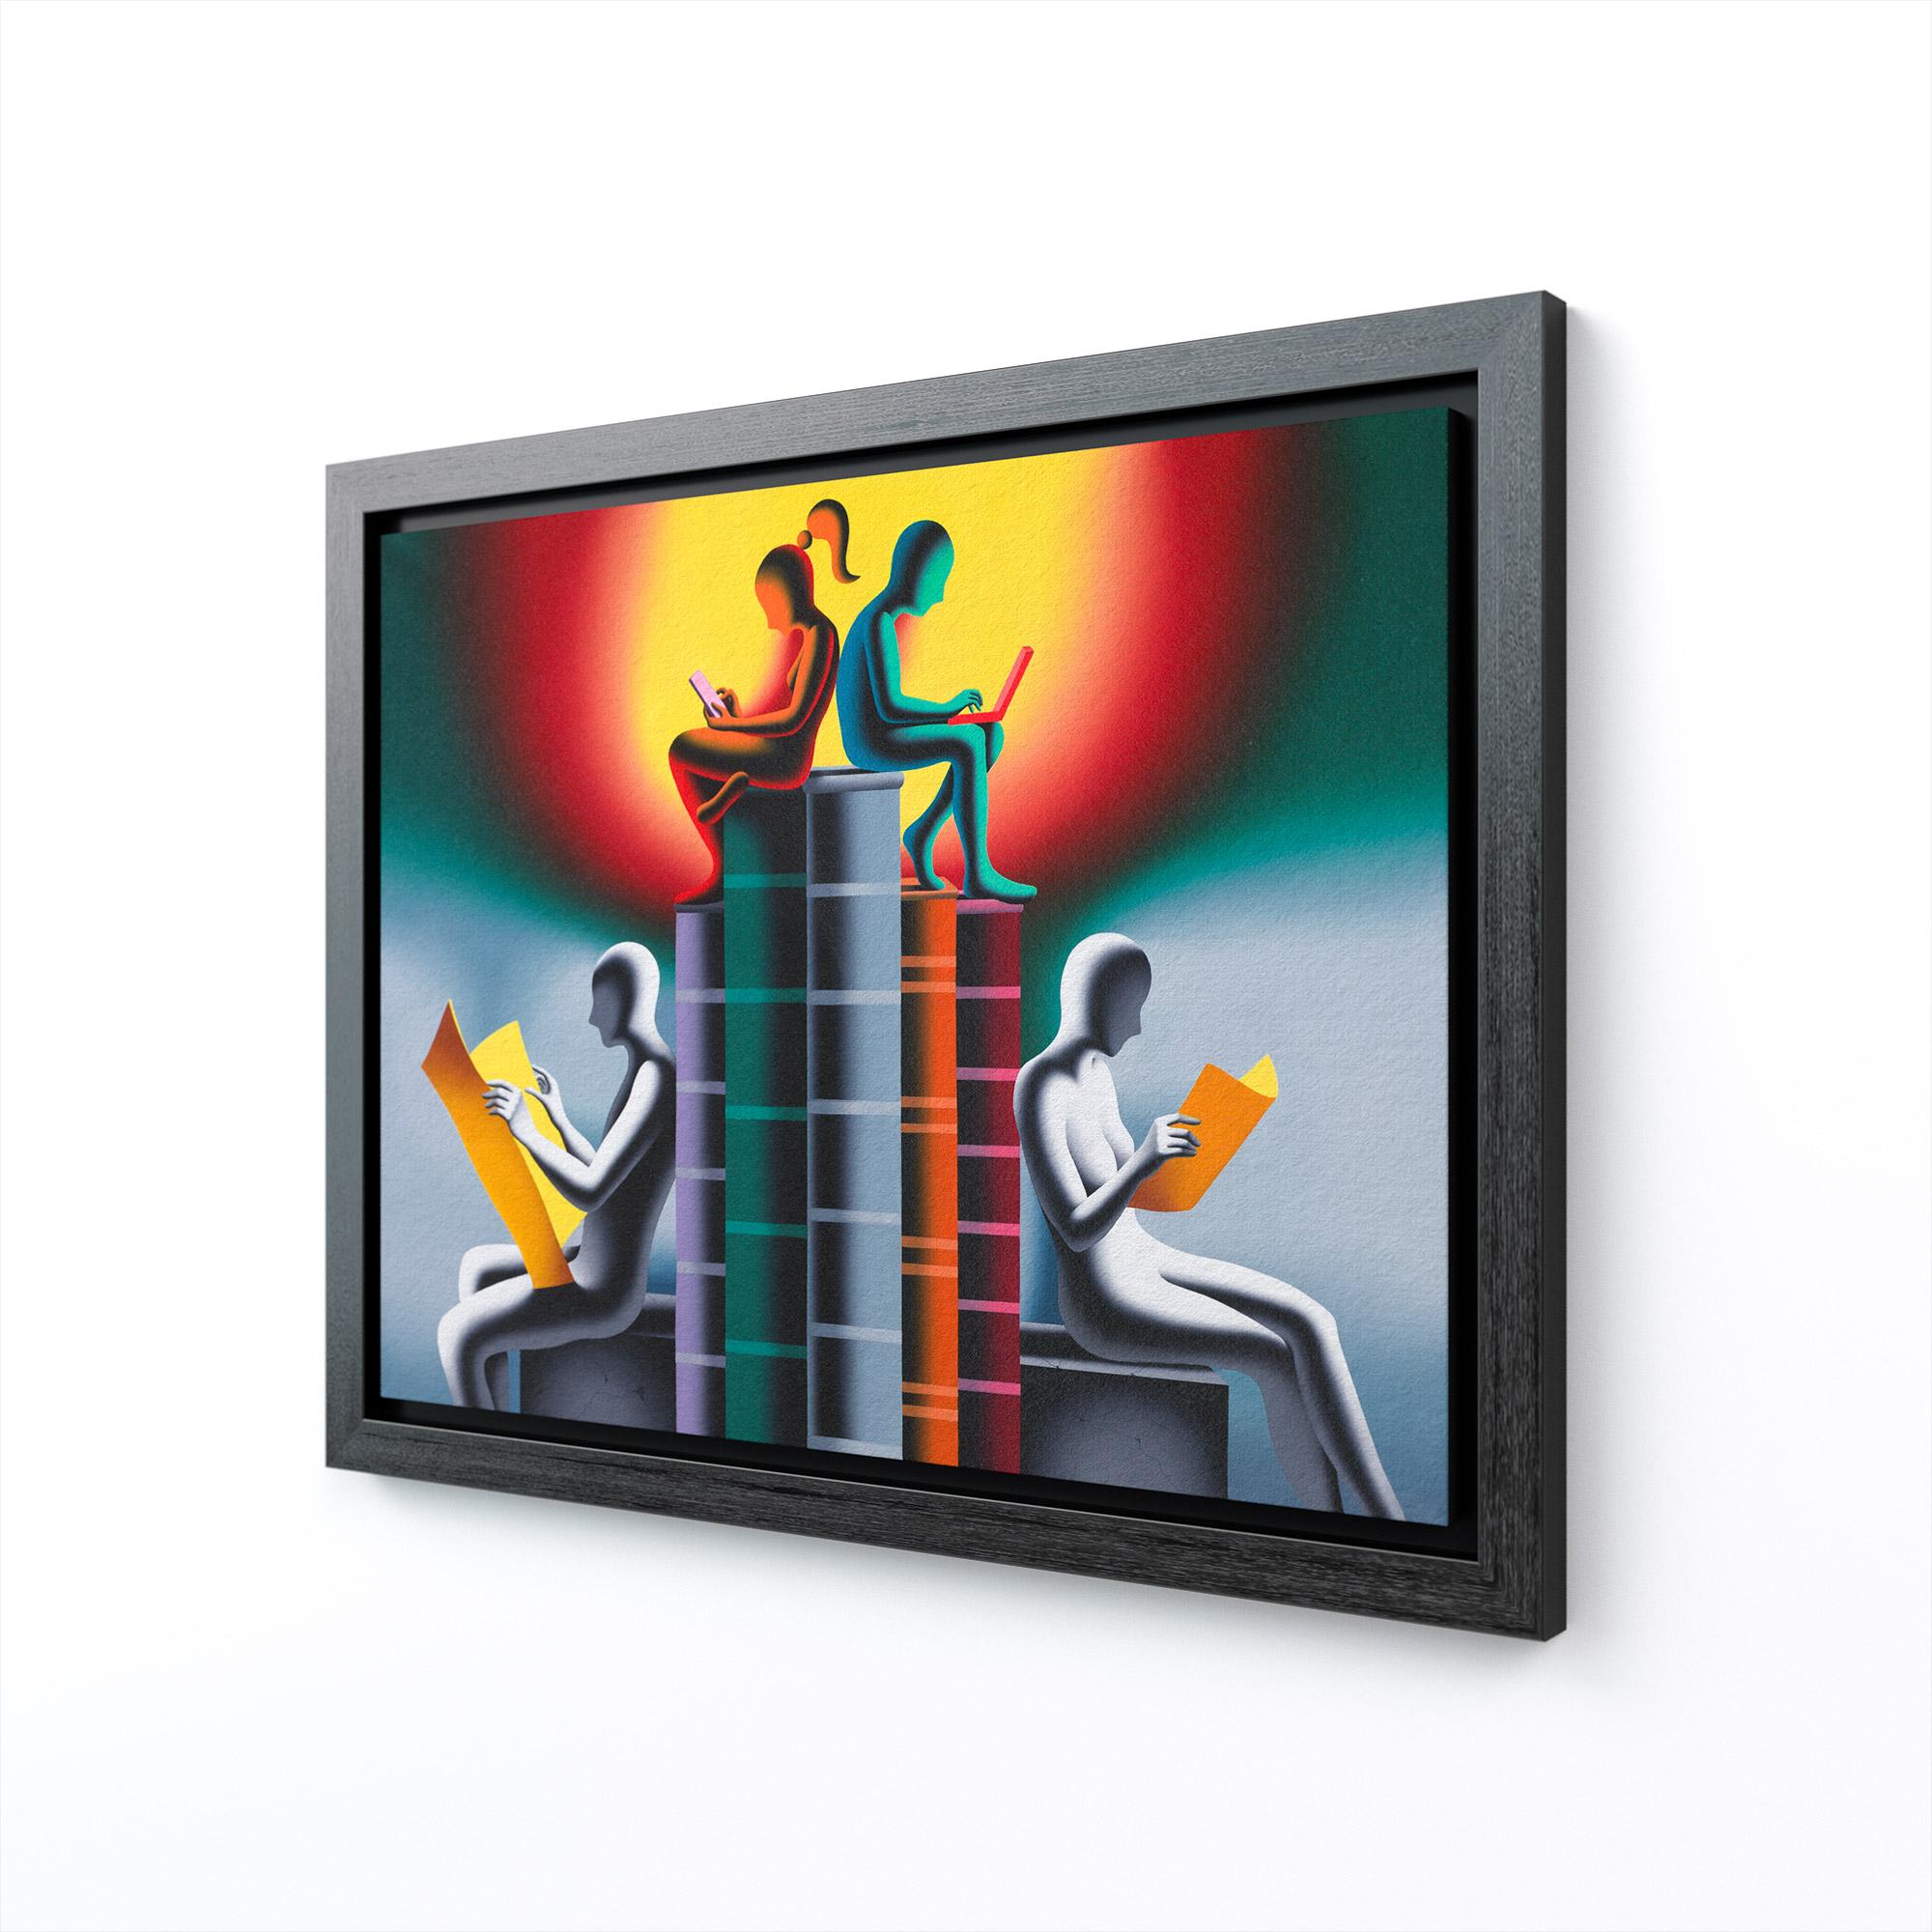 Volumes of Technology - Black Figurative Painting by Mark Kostabi